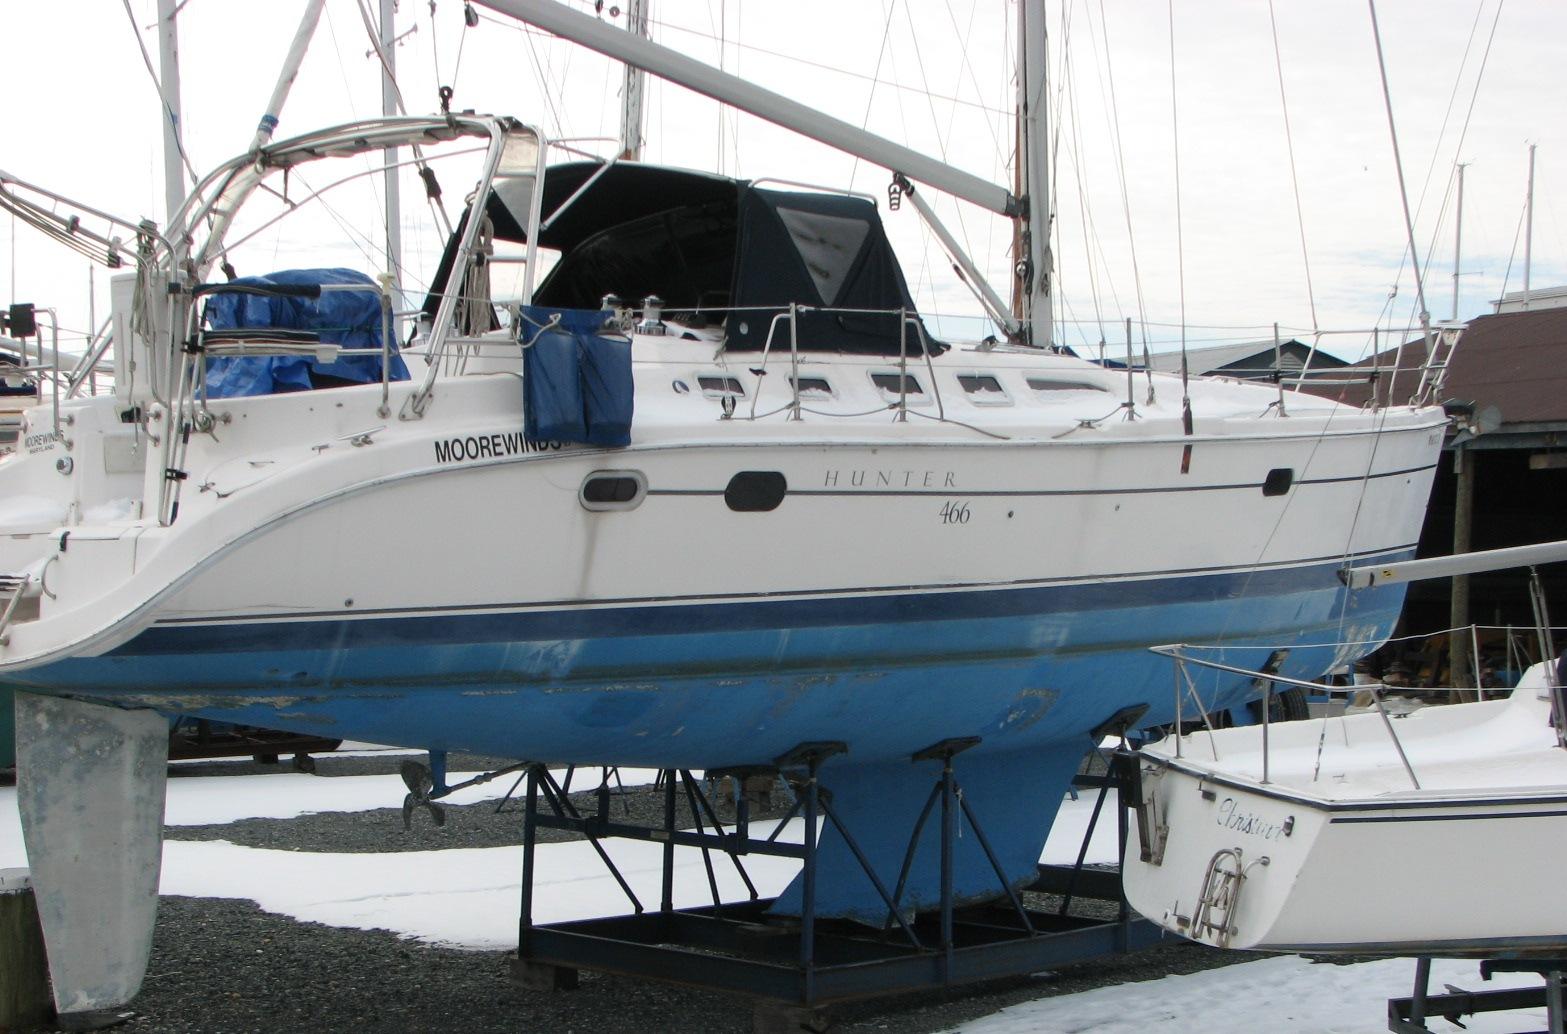 46 Foot Boats for Sale in MD | Boat listings